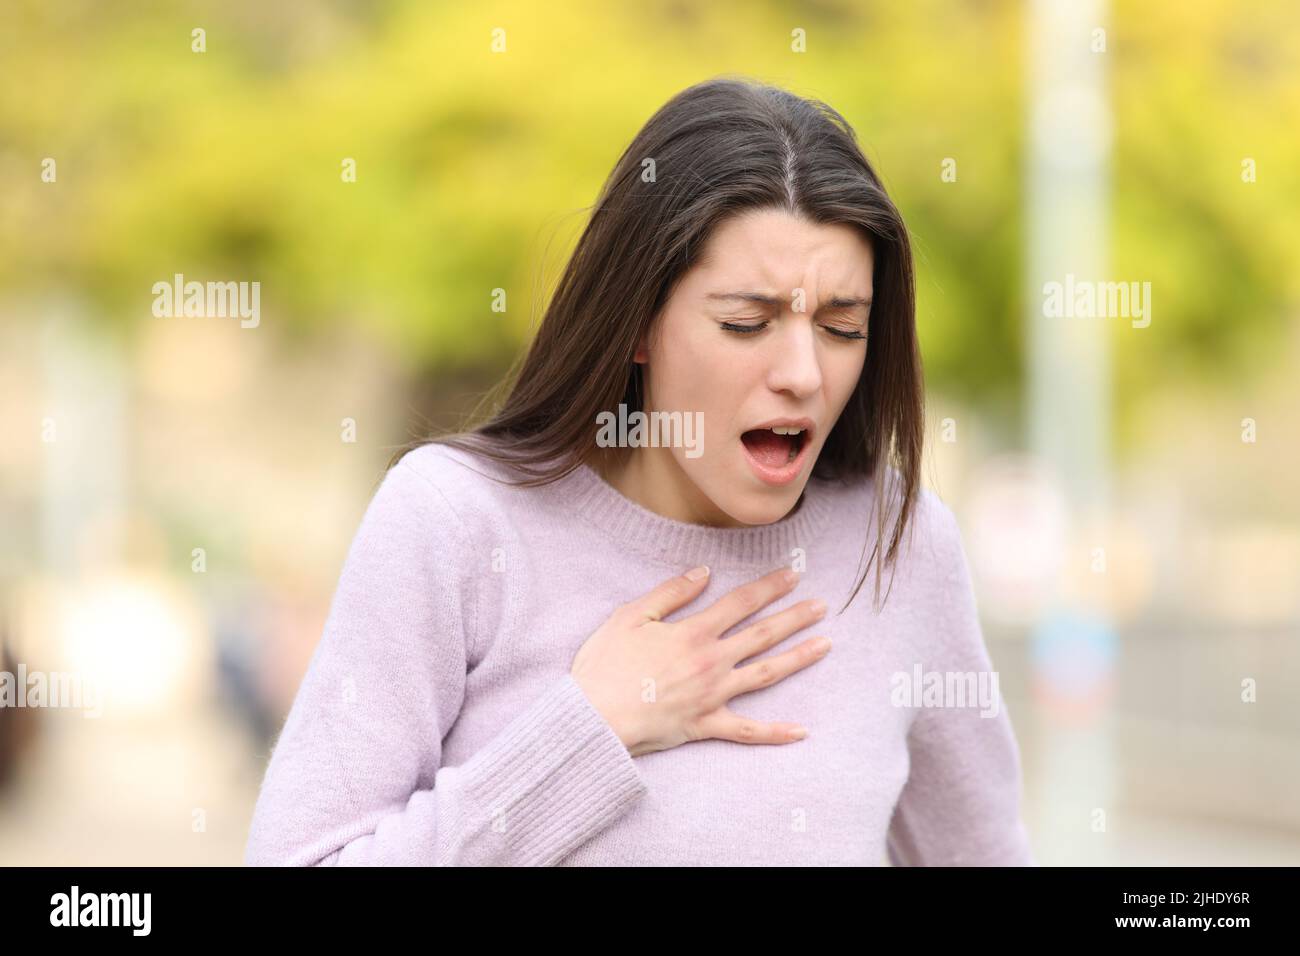 Stressed teen having breath problems standing in a park Stock Photo